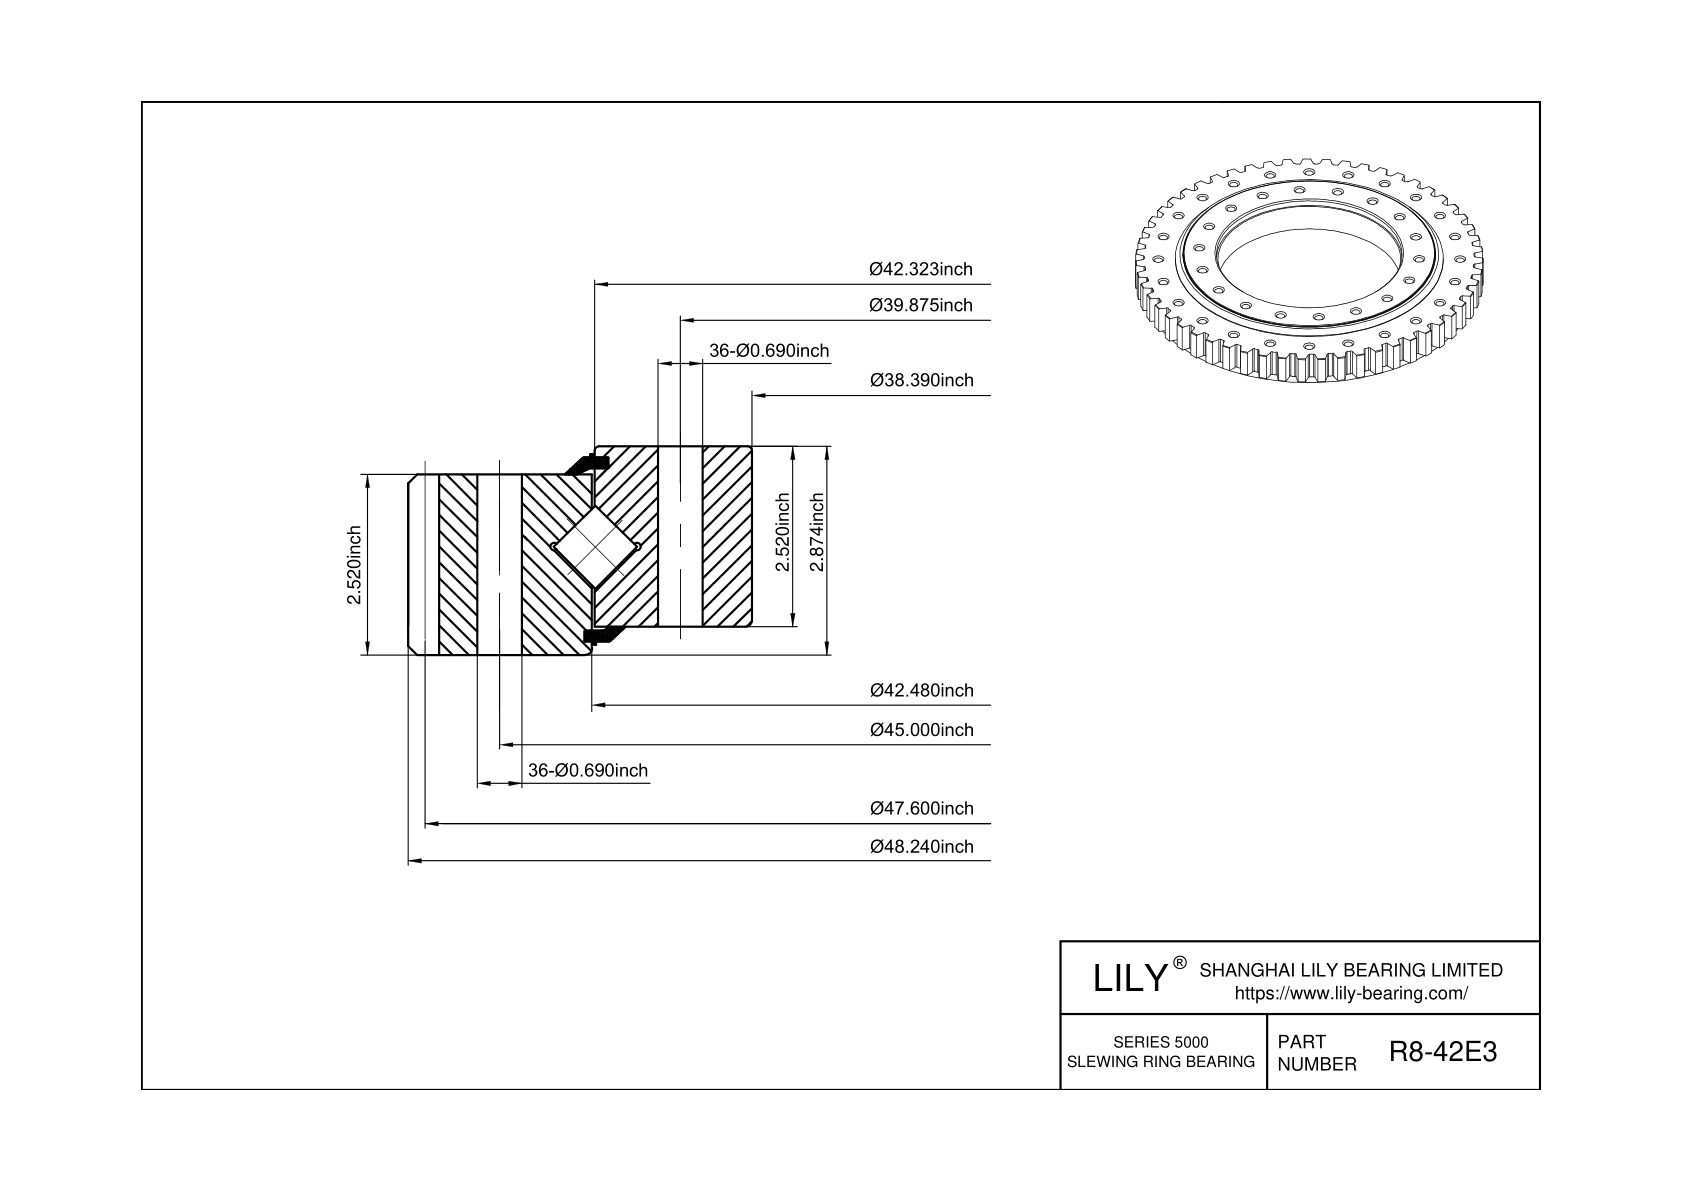 R8-42E3 Cross Roller Slewing Ring Bearing cad drawing